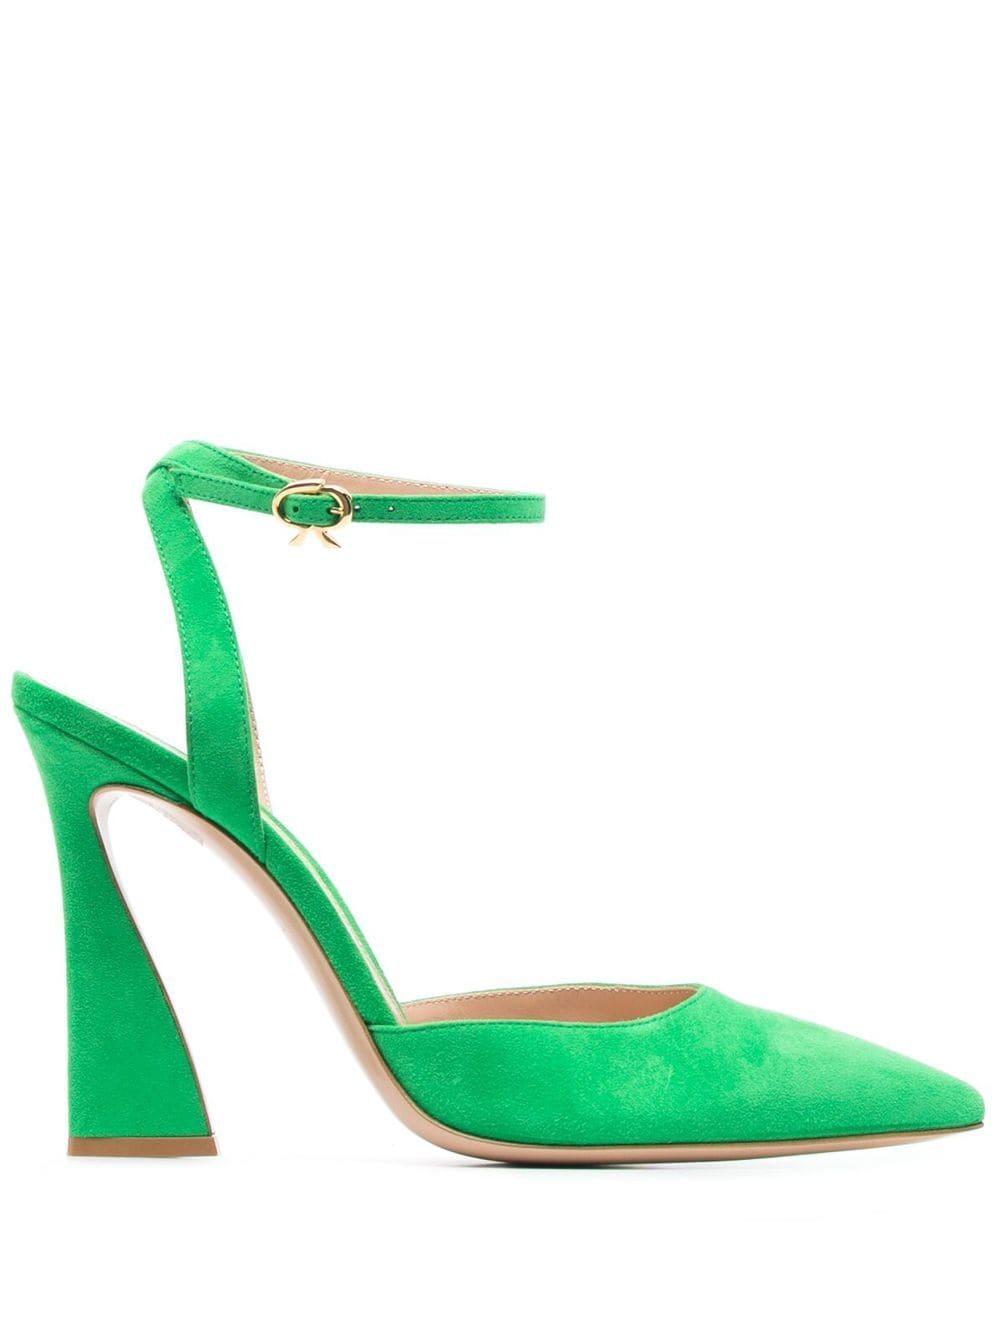 Gianvito Rossi Aura D'orsay 80mm Suede Pumps in Green | Lyst